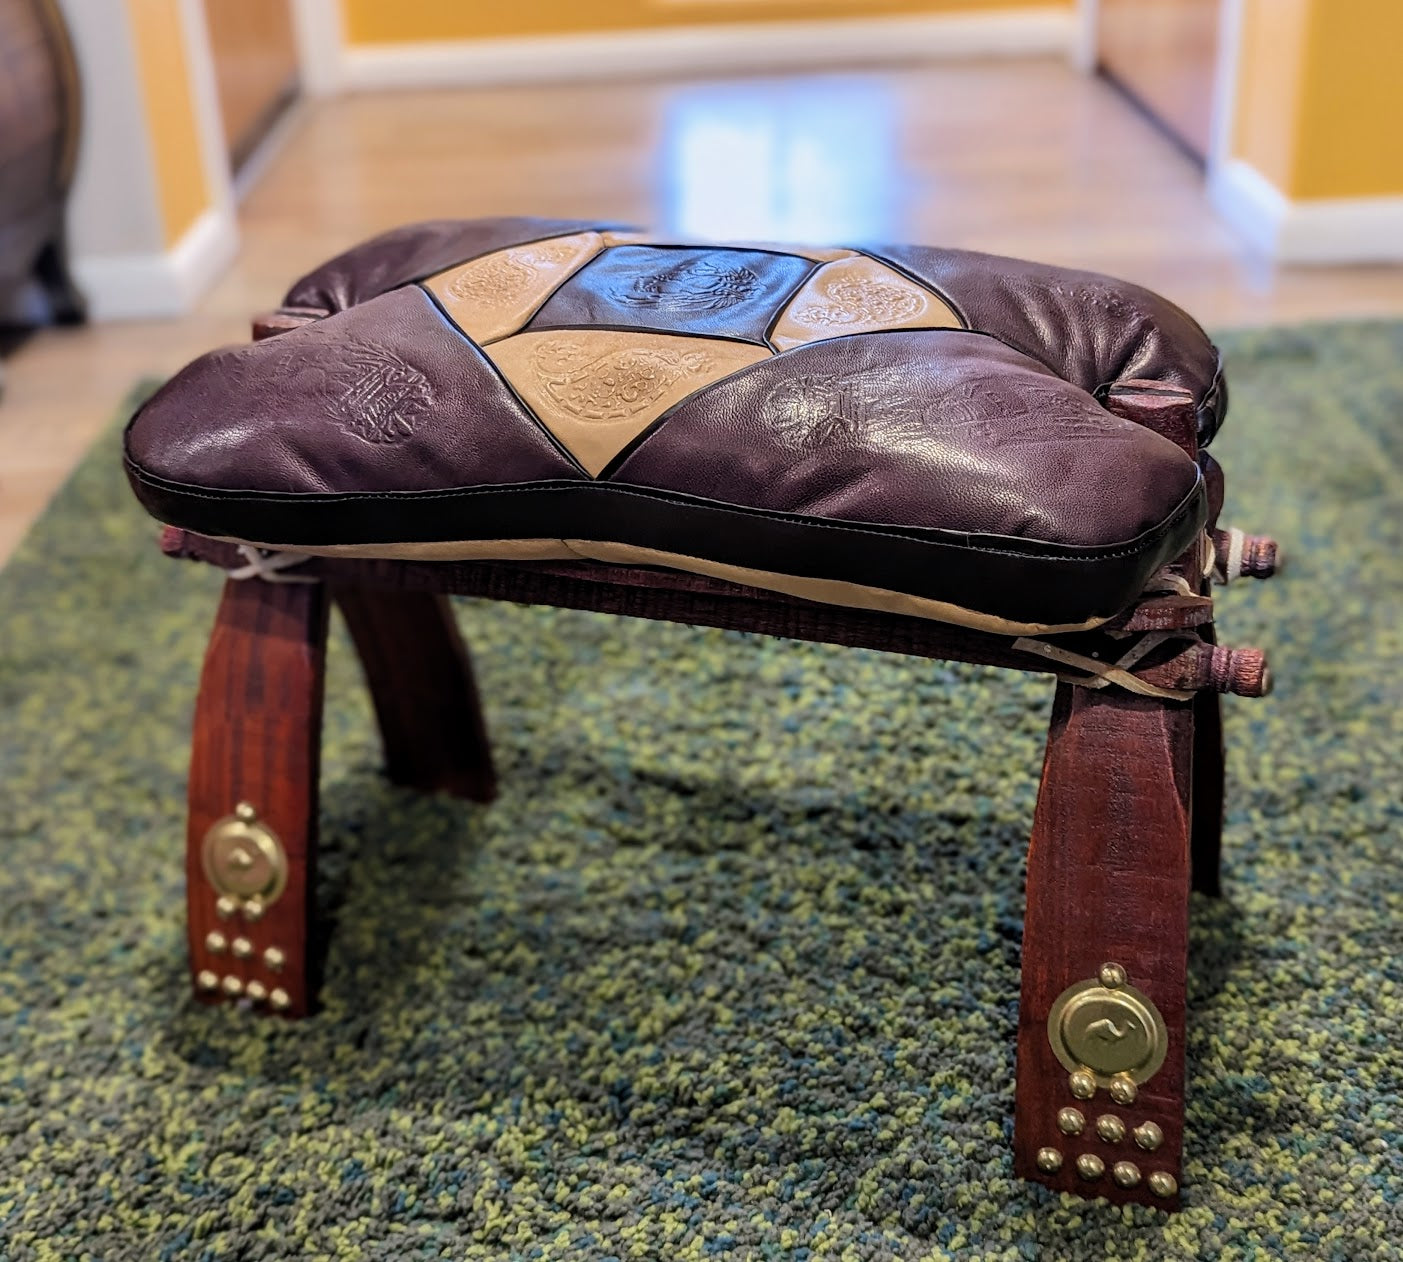 Vintage Egyptian Leather Camel Saddle Foot Stool | Egyptian Revival Period